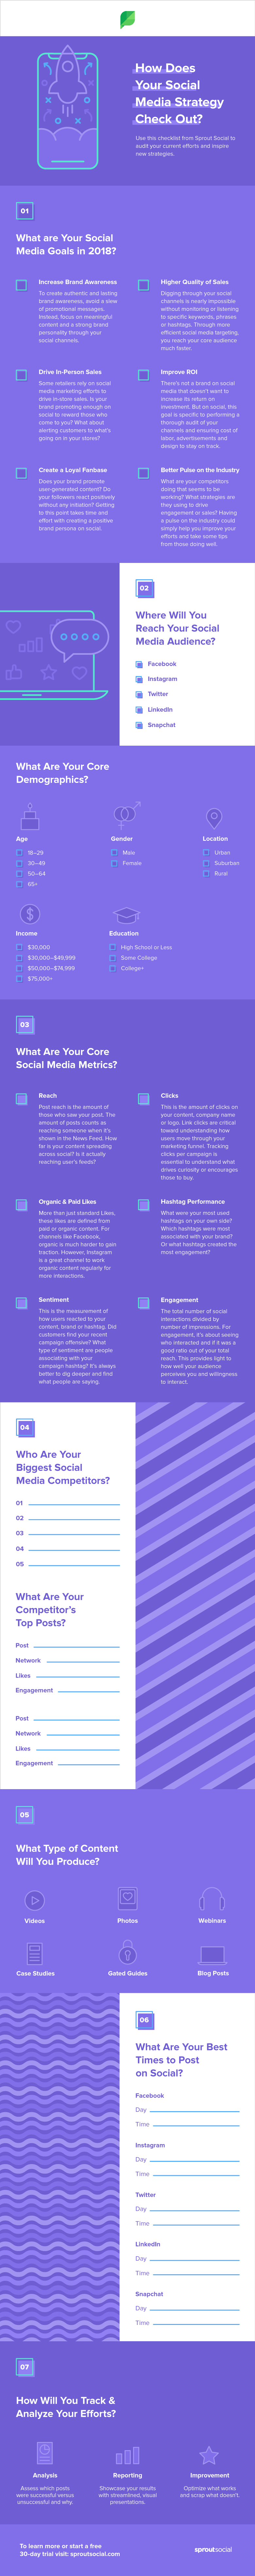 Infografia - 7 Steps in Creating a Winning Social Media Marketing Strategy in 2018